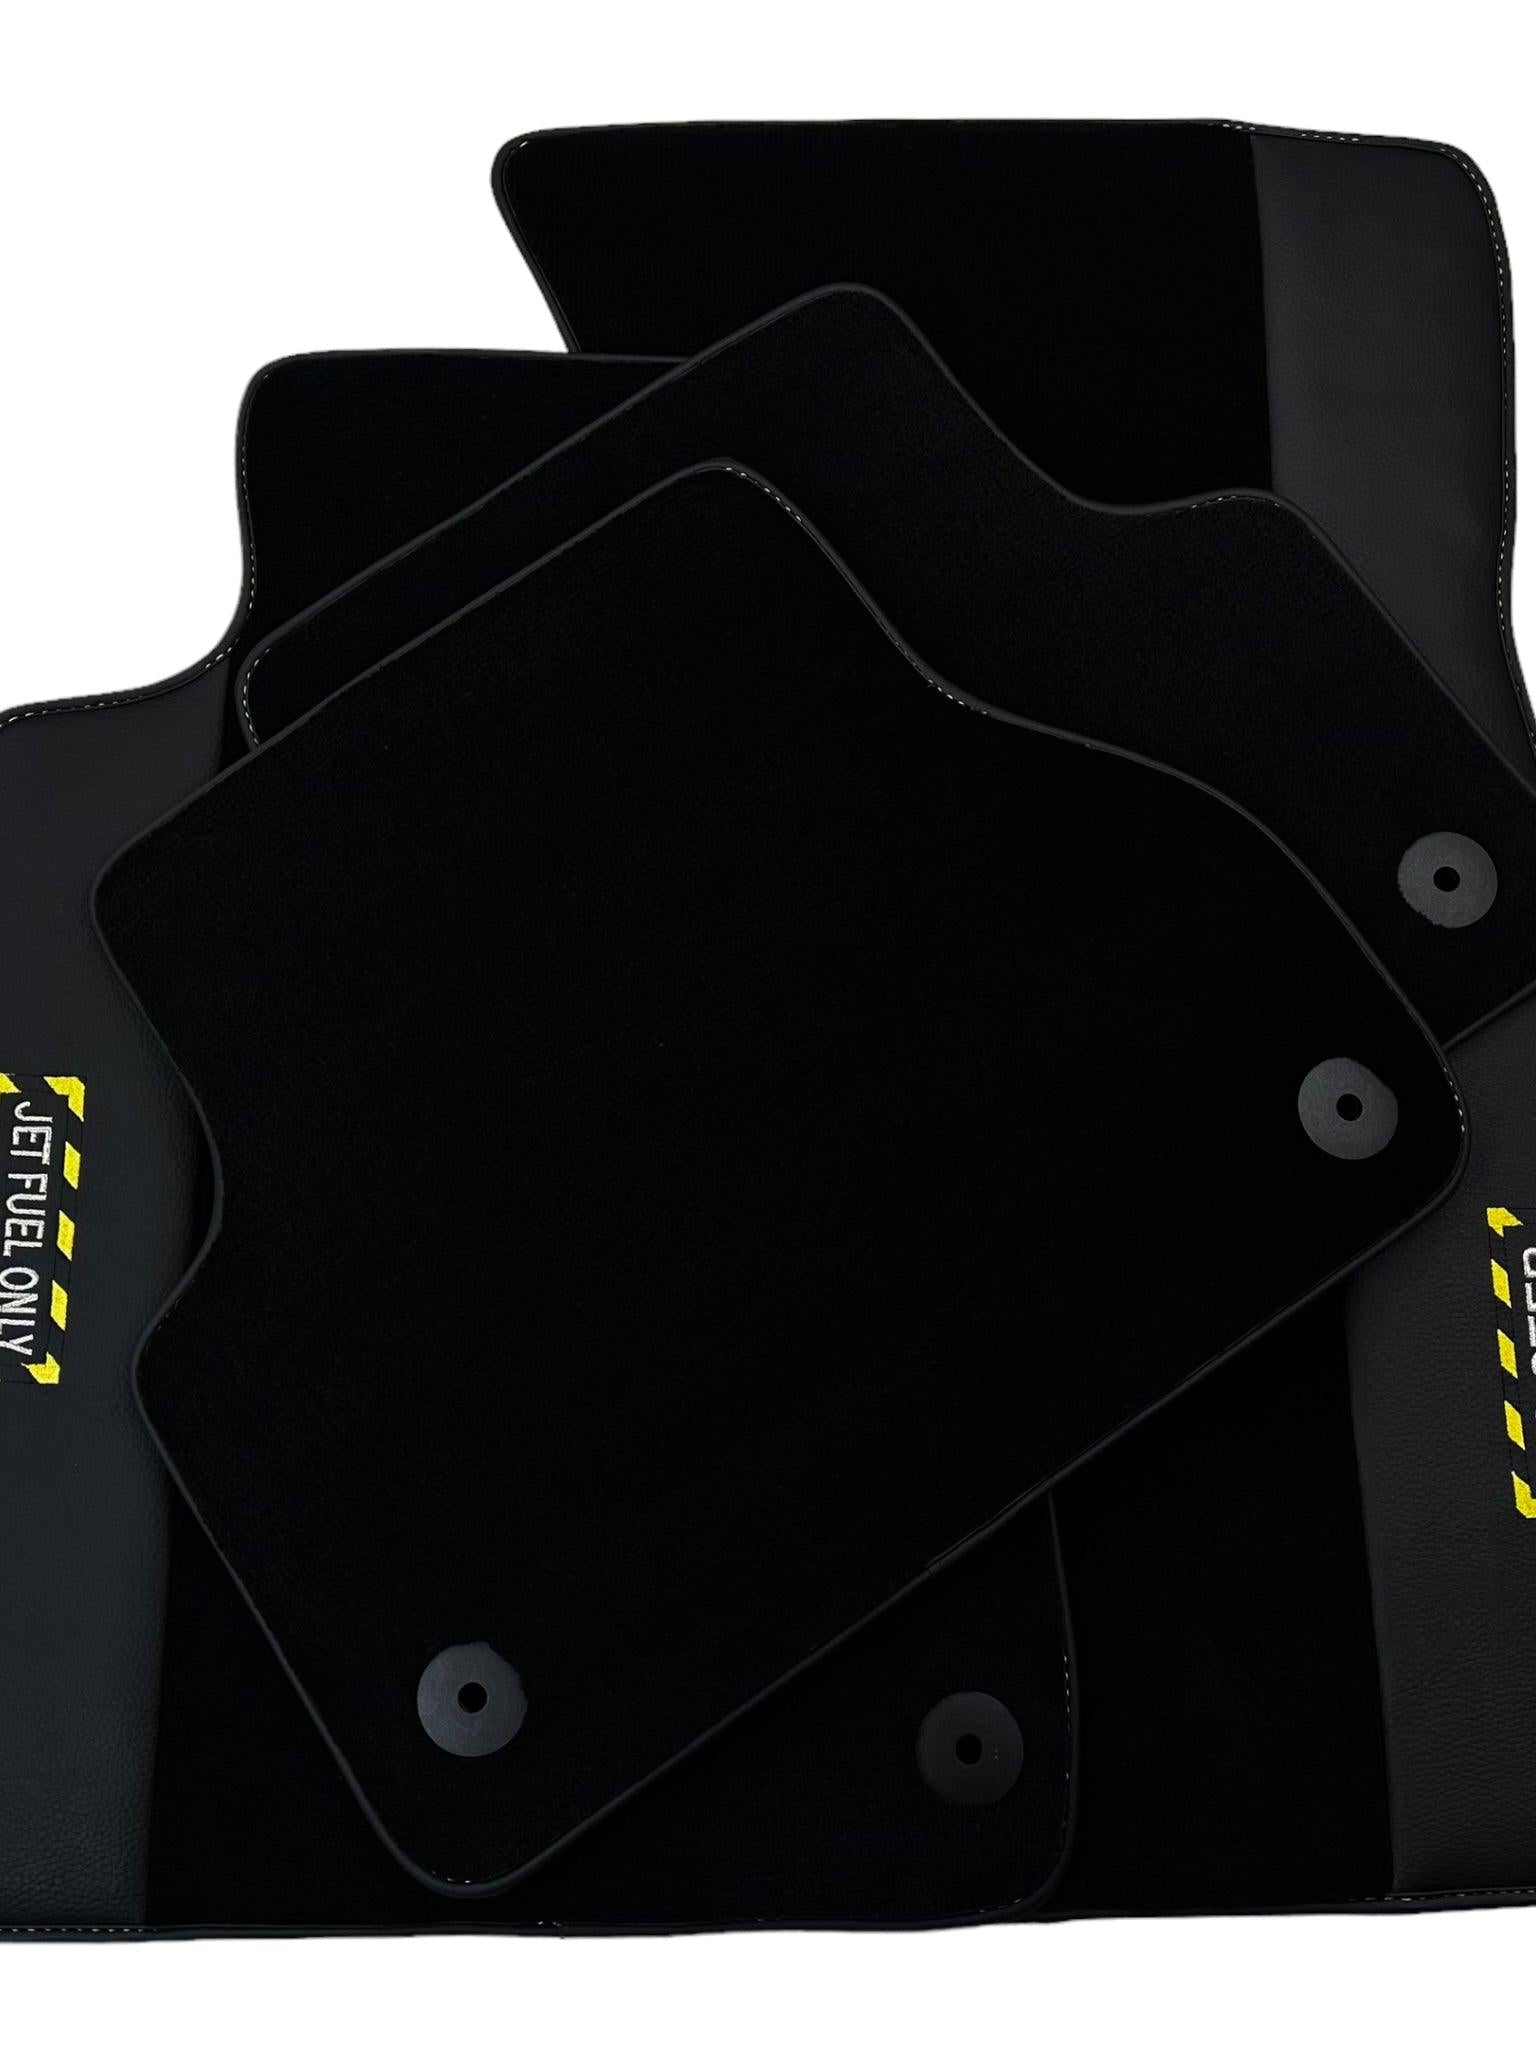 Black Floor Mats for Audi A3 - Convertible (2014-2020) | Fighter Jet Edition